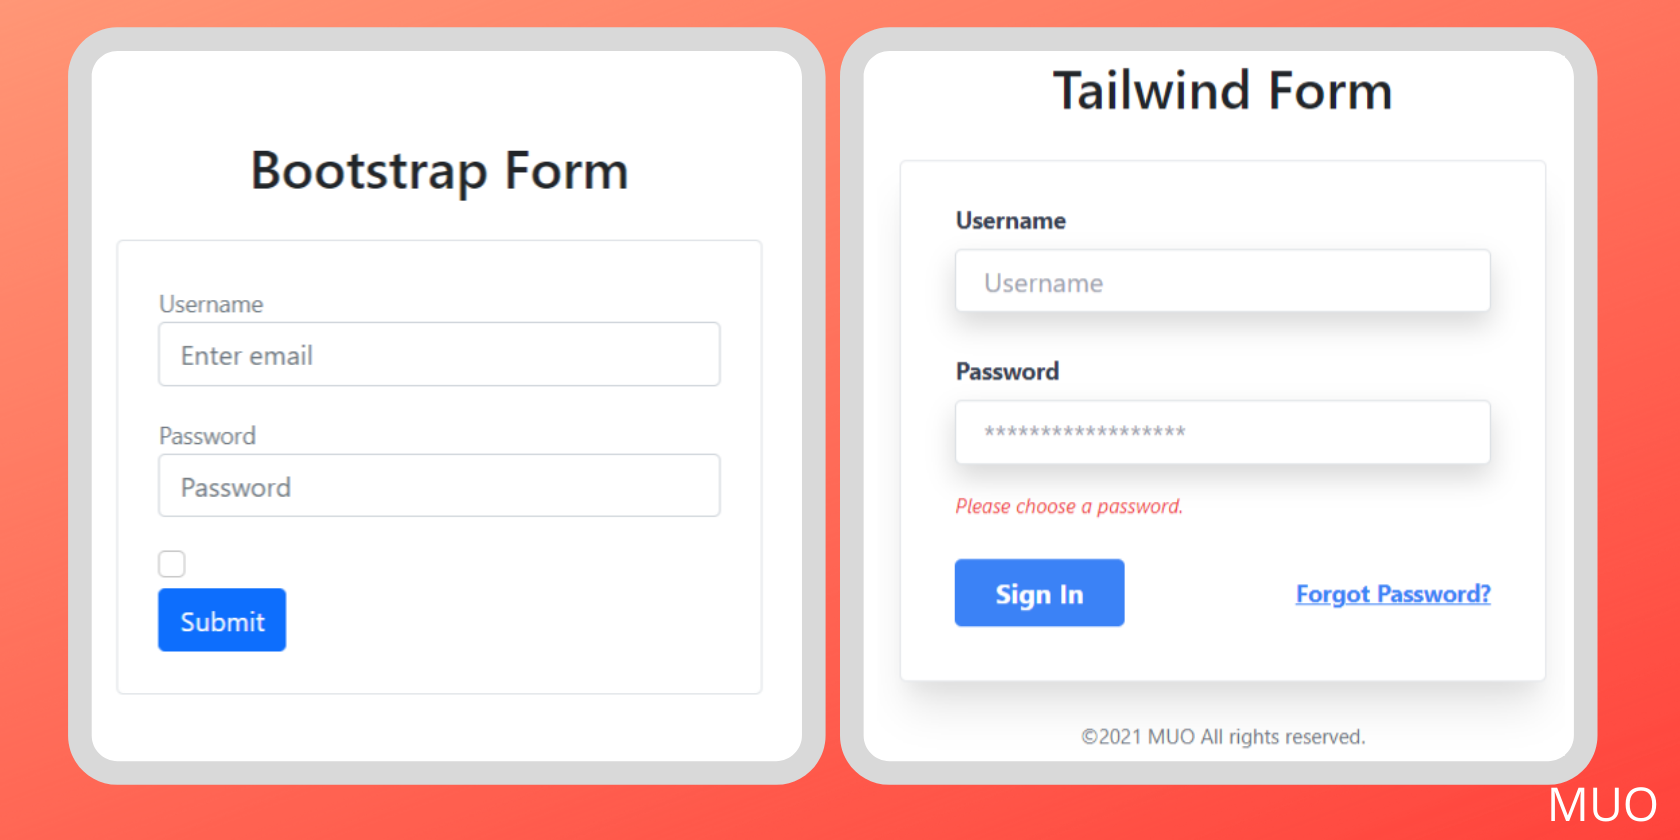 V bootstrap. Tailwind или Bootstrap. Tailwind js. Tailwind search form. Tailwind UI.